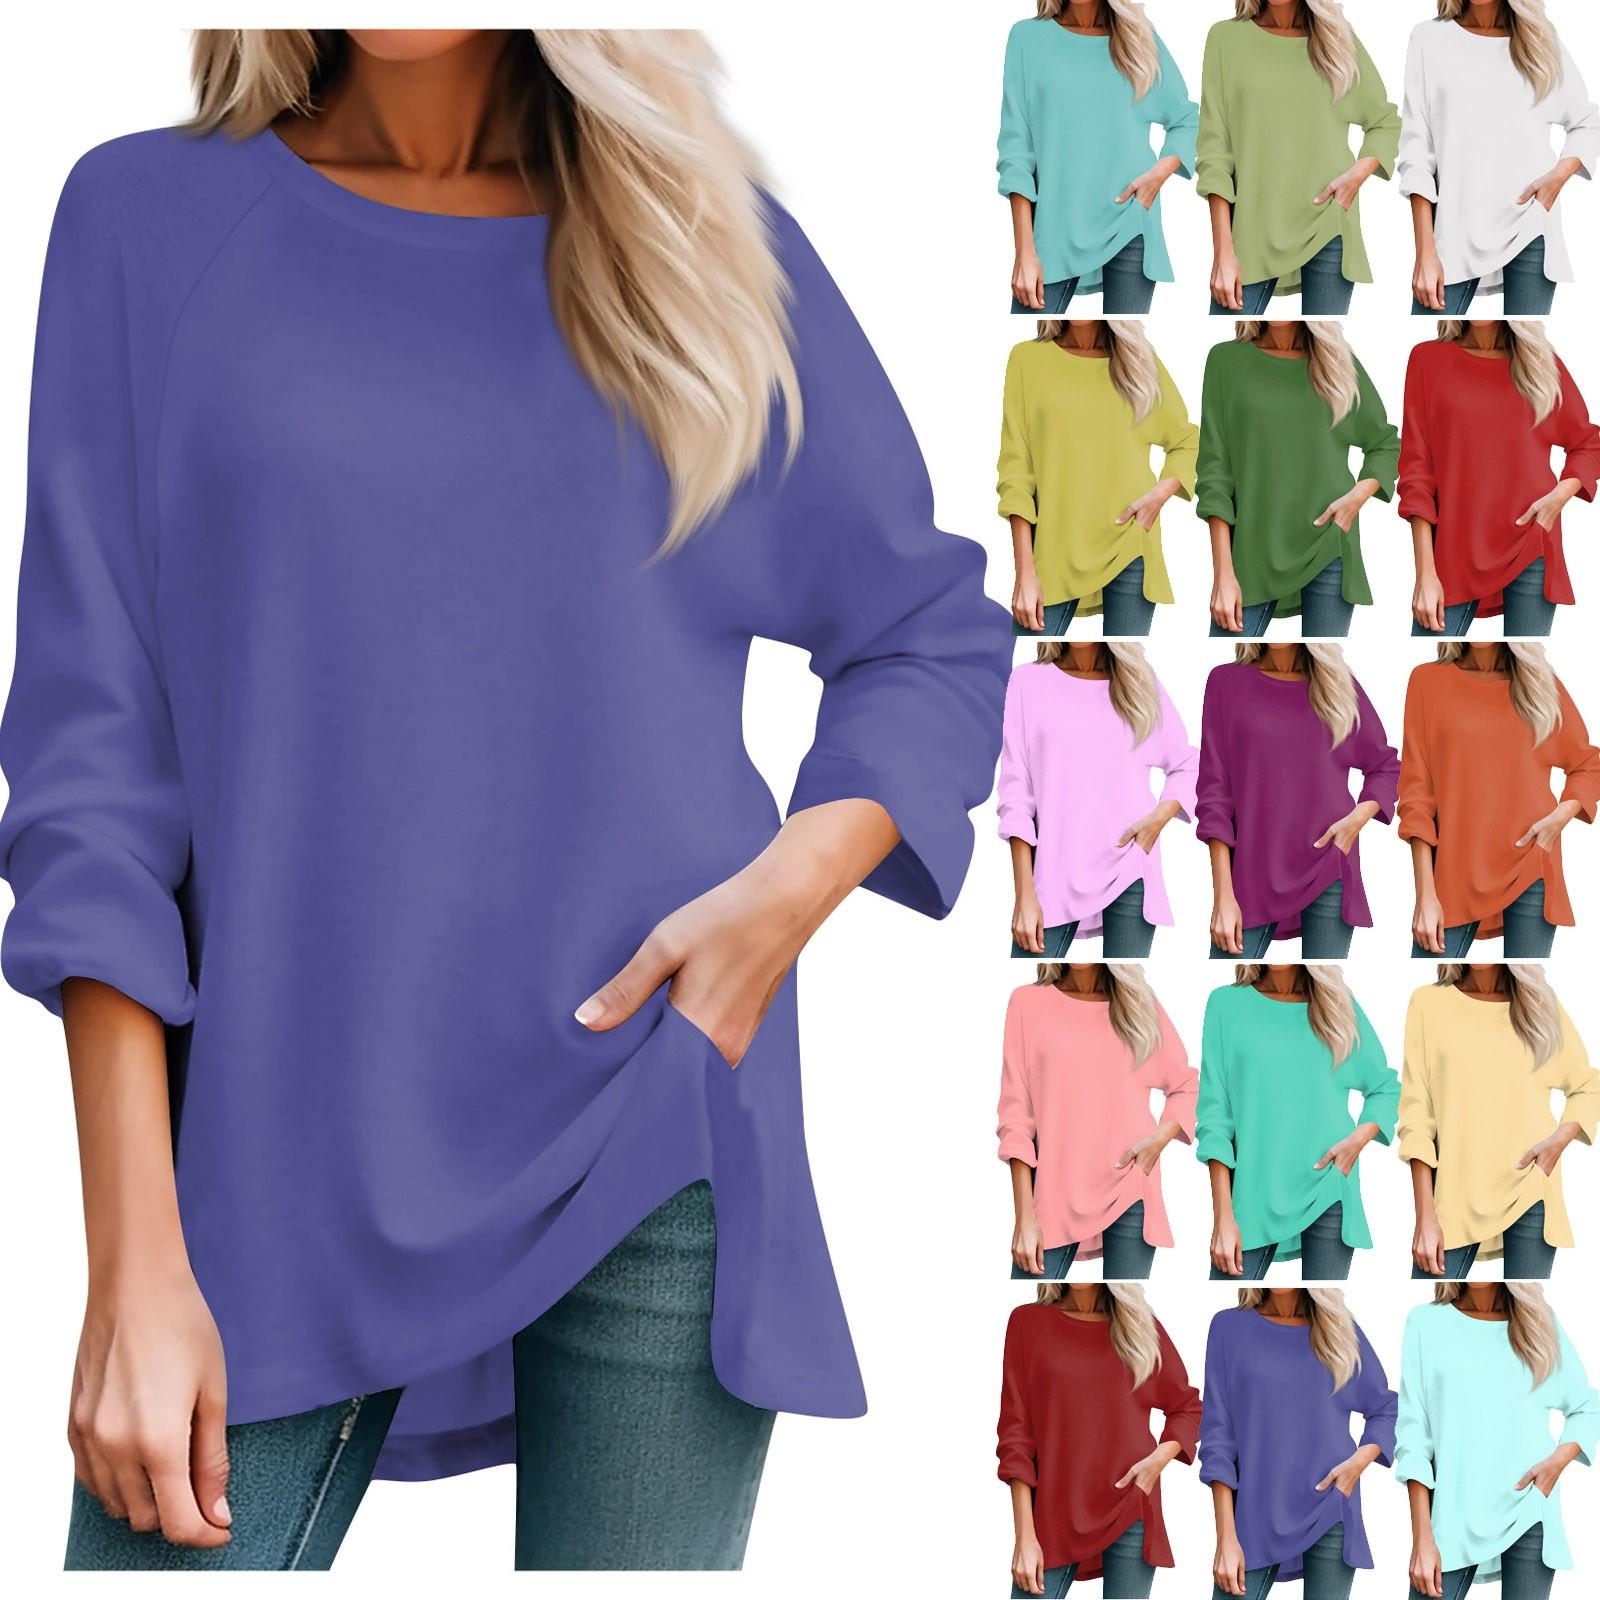 WhyMe Women's Fashion Casual T-shirt Solid Color Long Sleeve Round Neck Medium Long Top